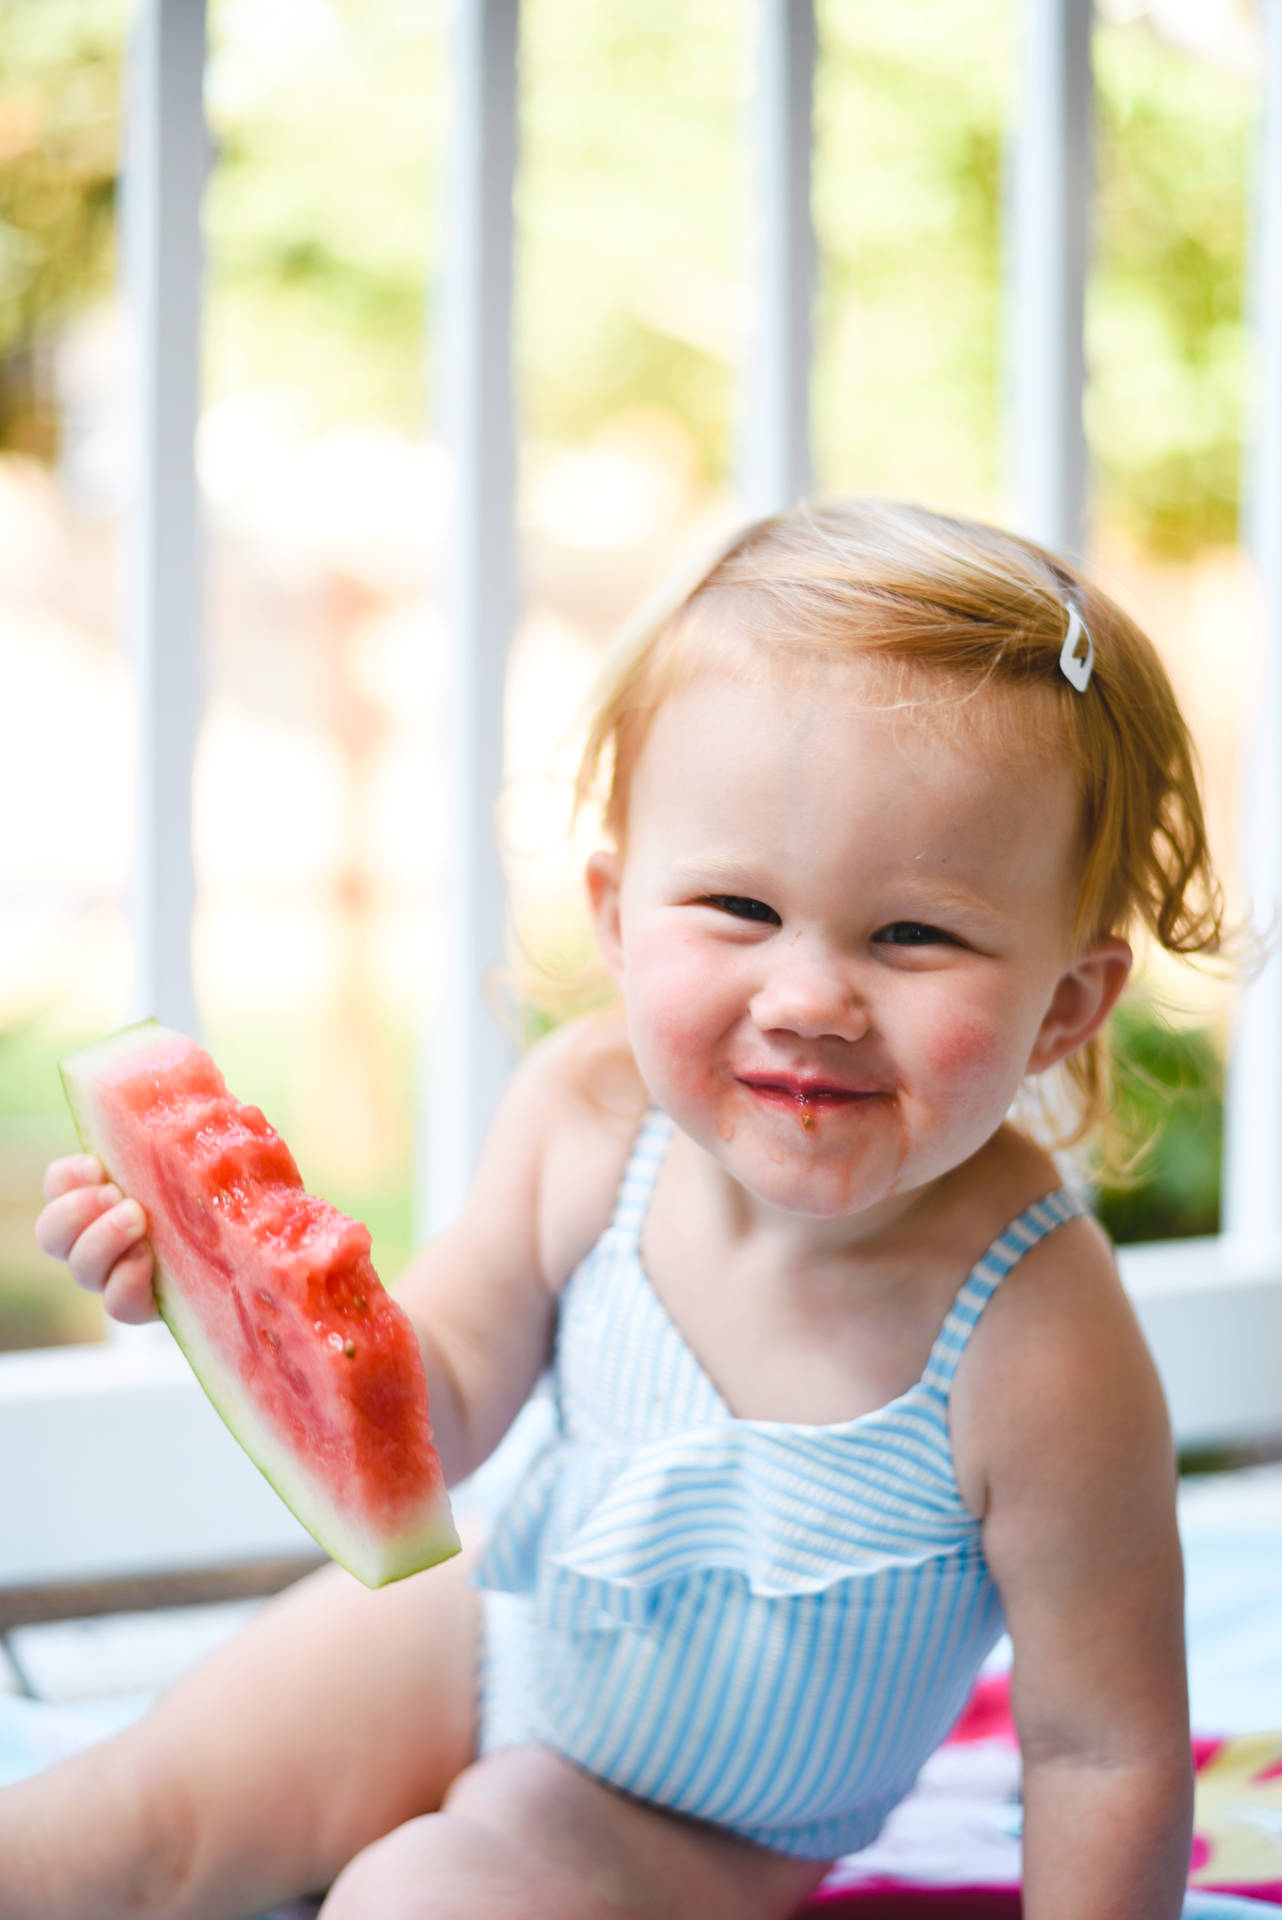 Smiling Baby With Watermelon Wallpaper